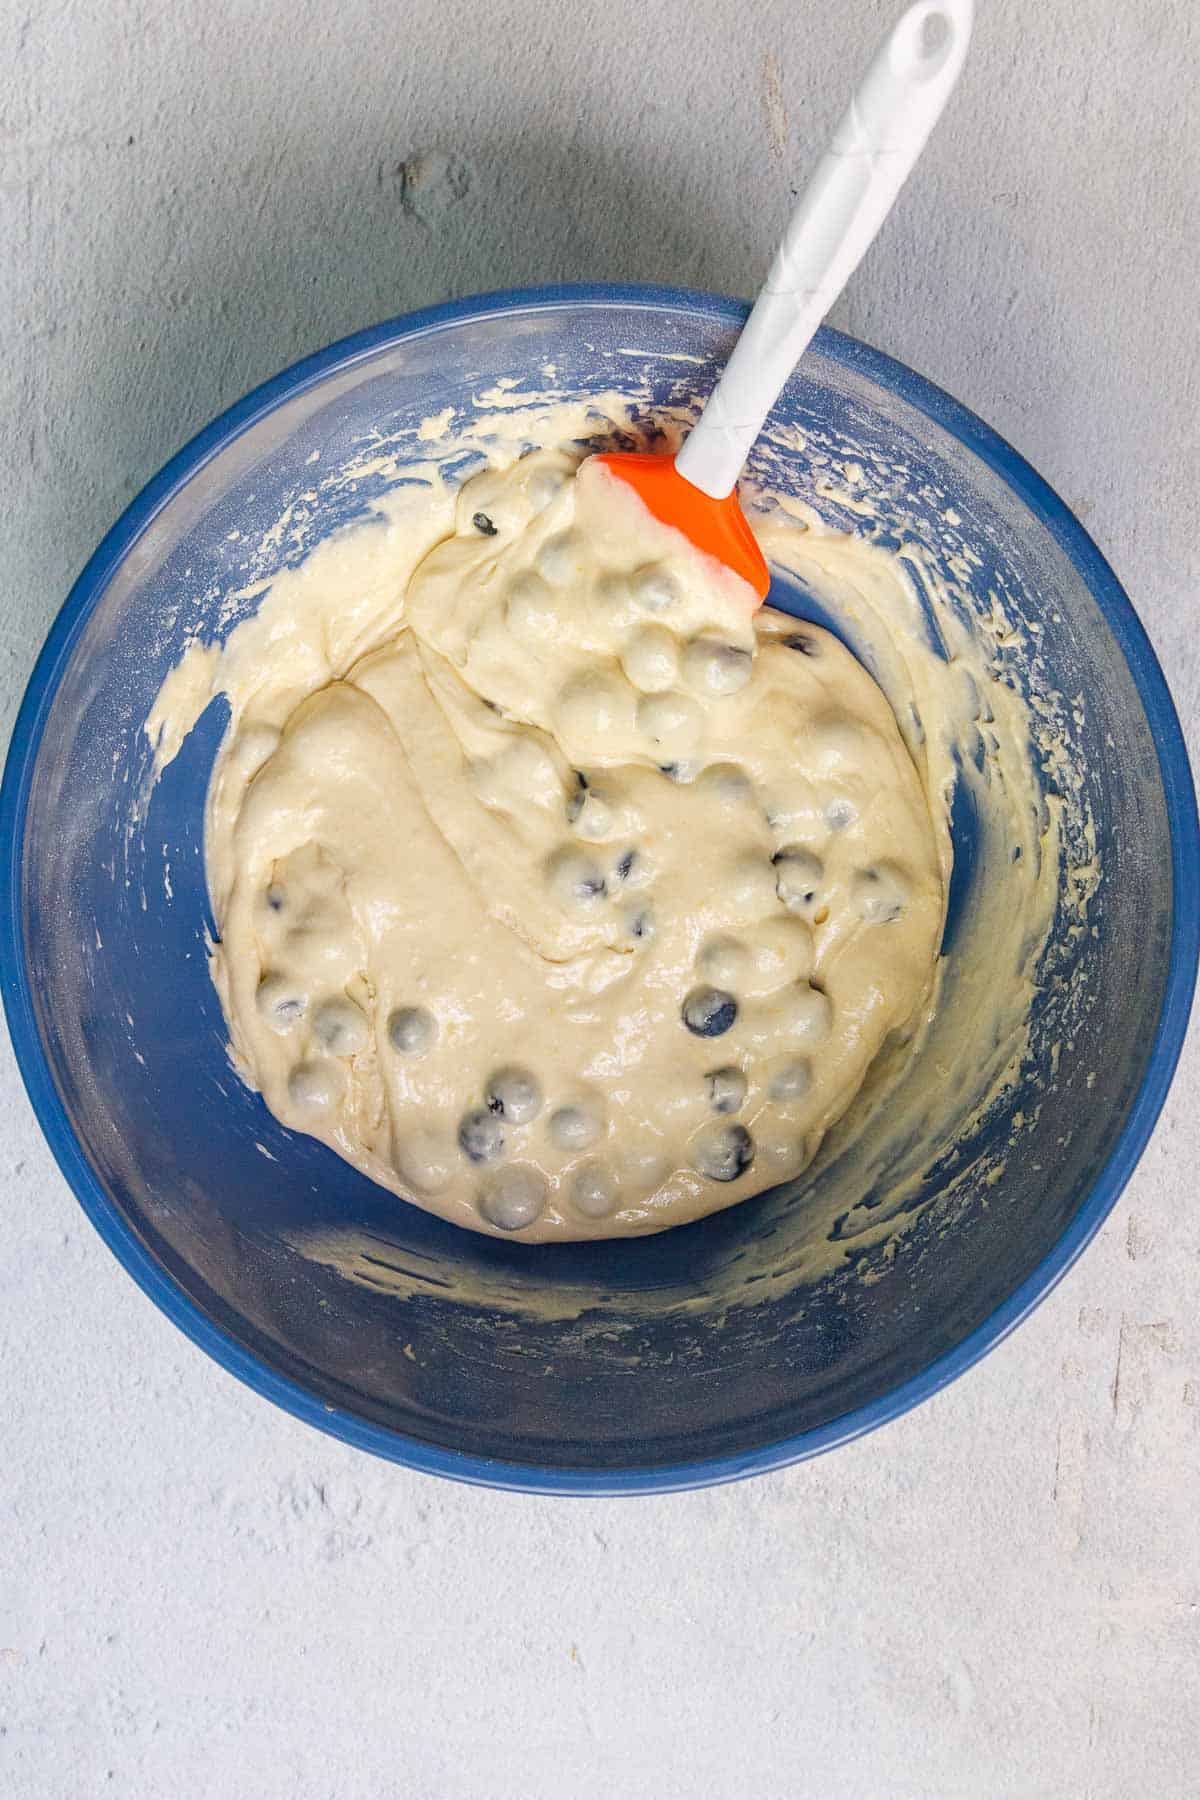 Cake mix blueberry muffin batter in a large mixing bowl with the blueberries folded in